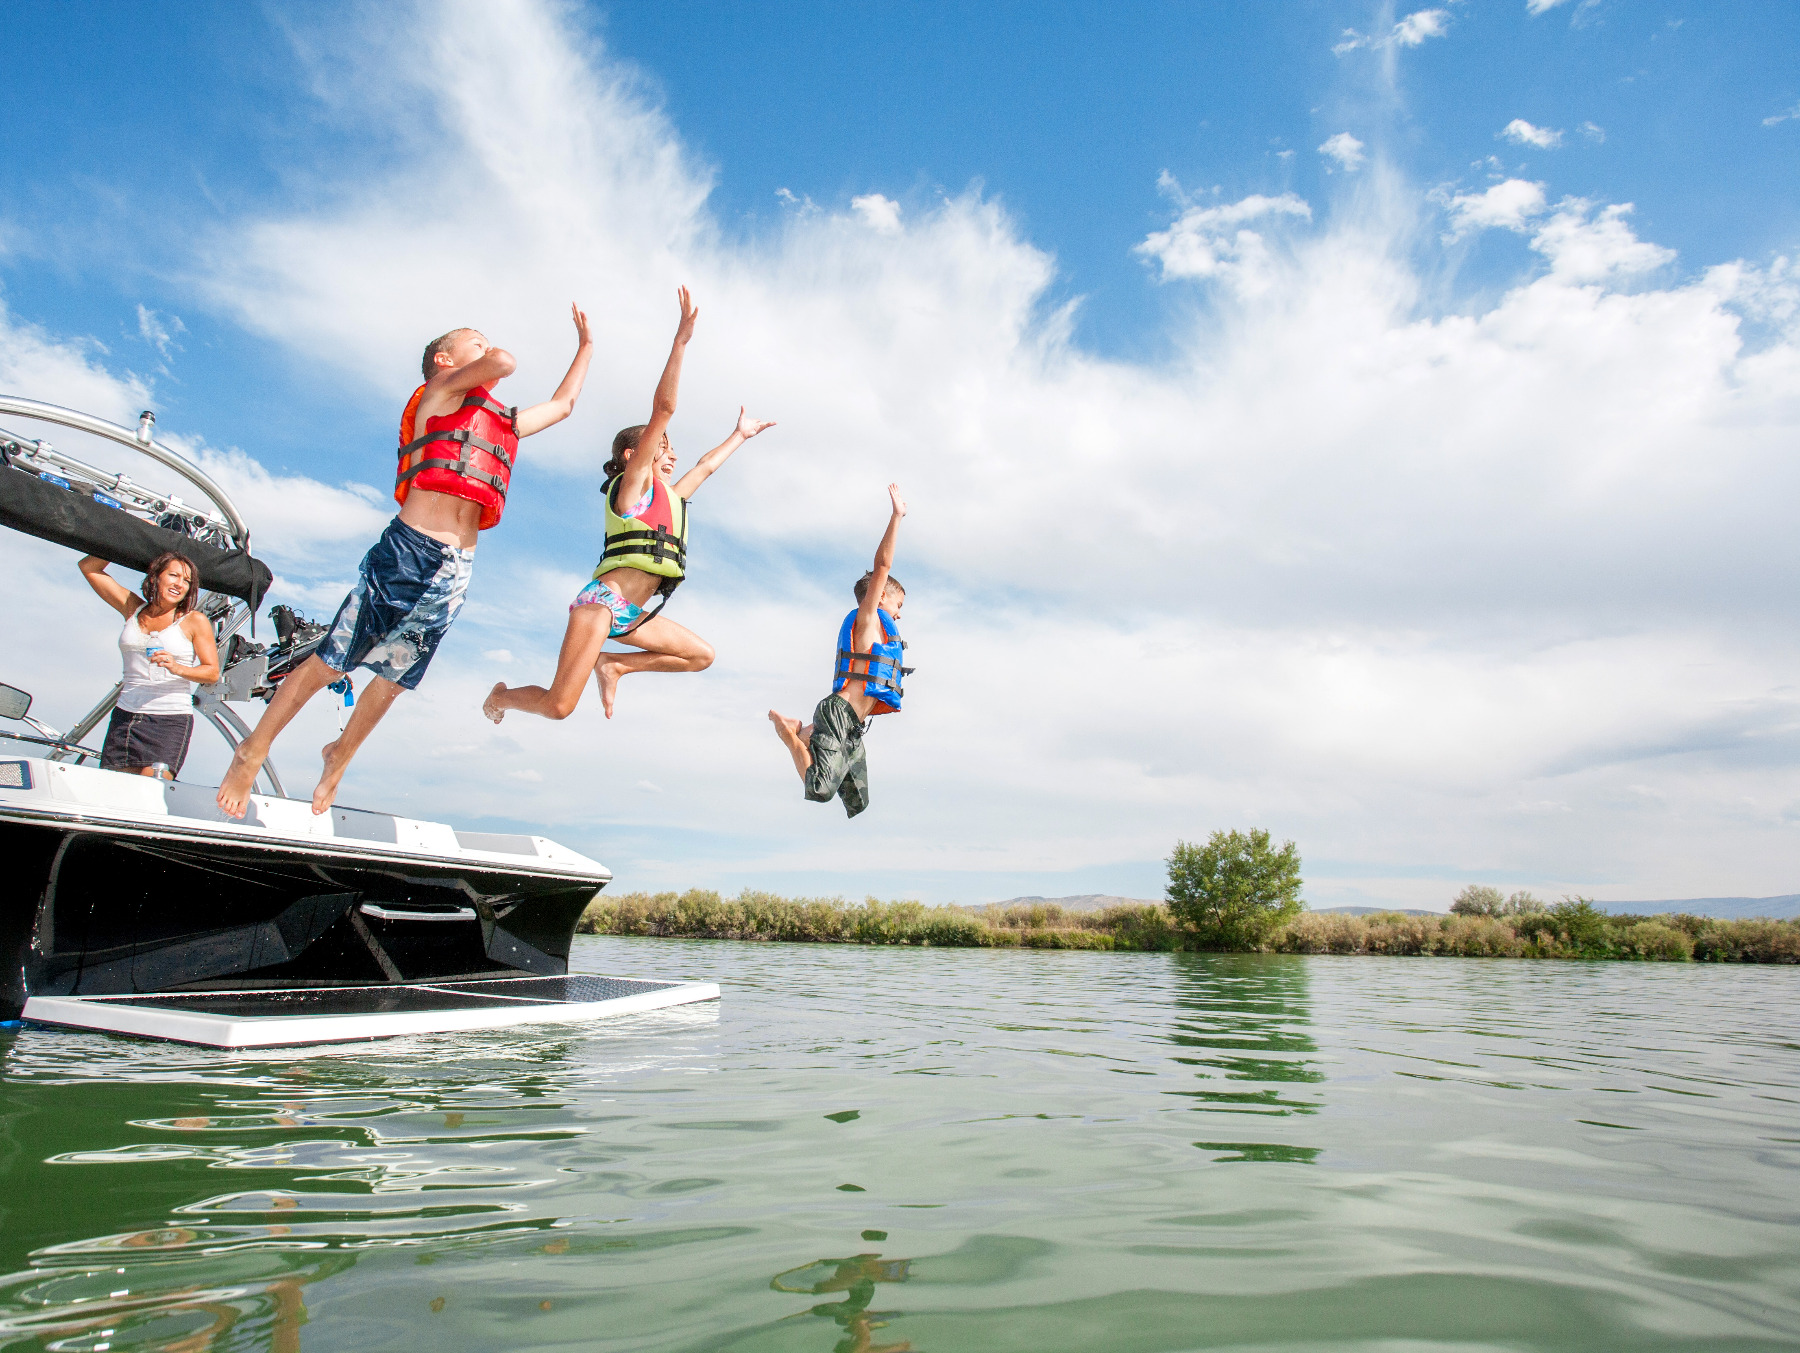 Kids jumping from boat